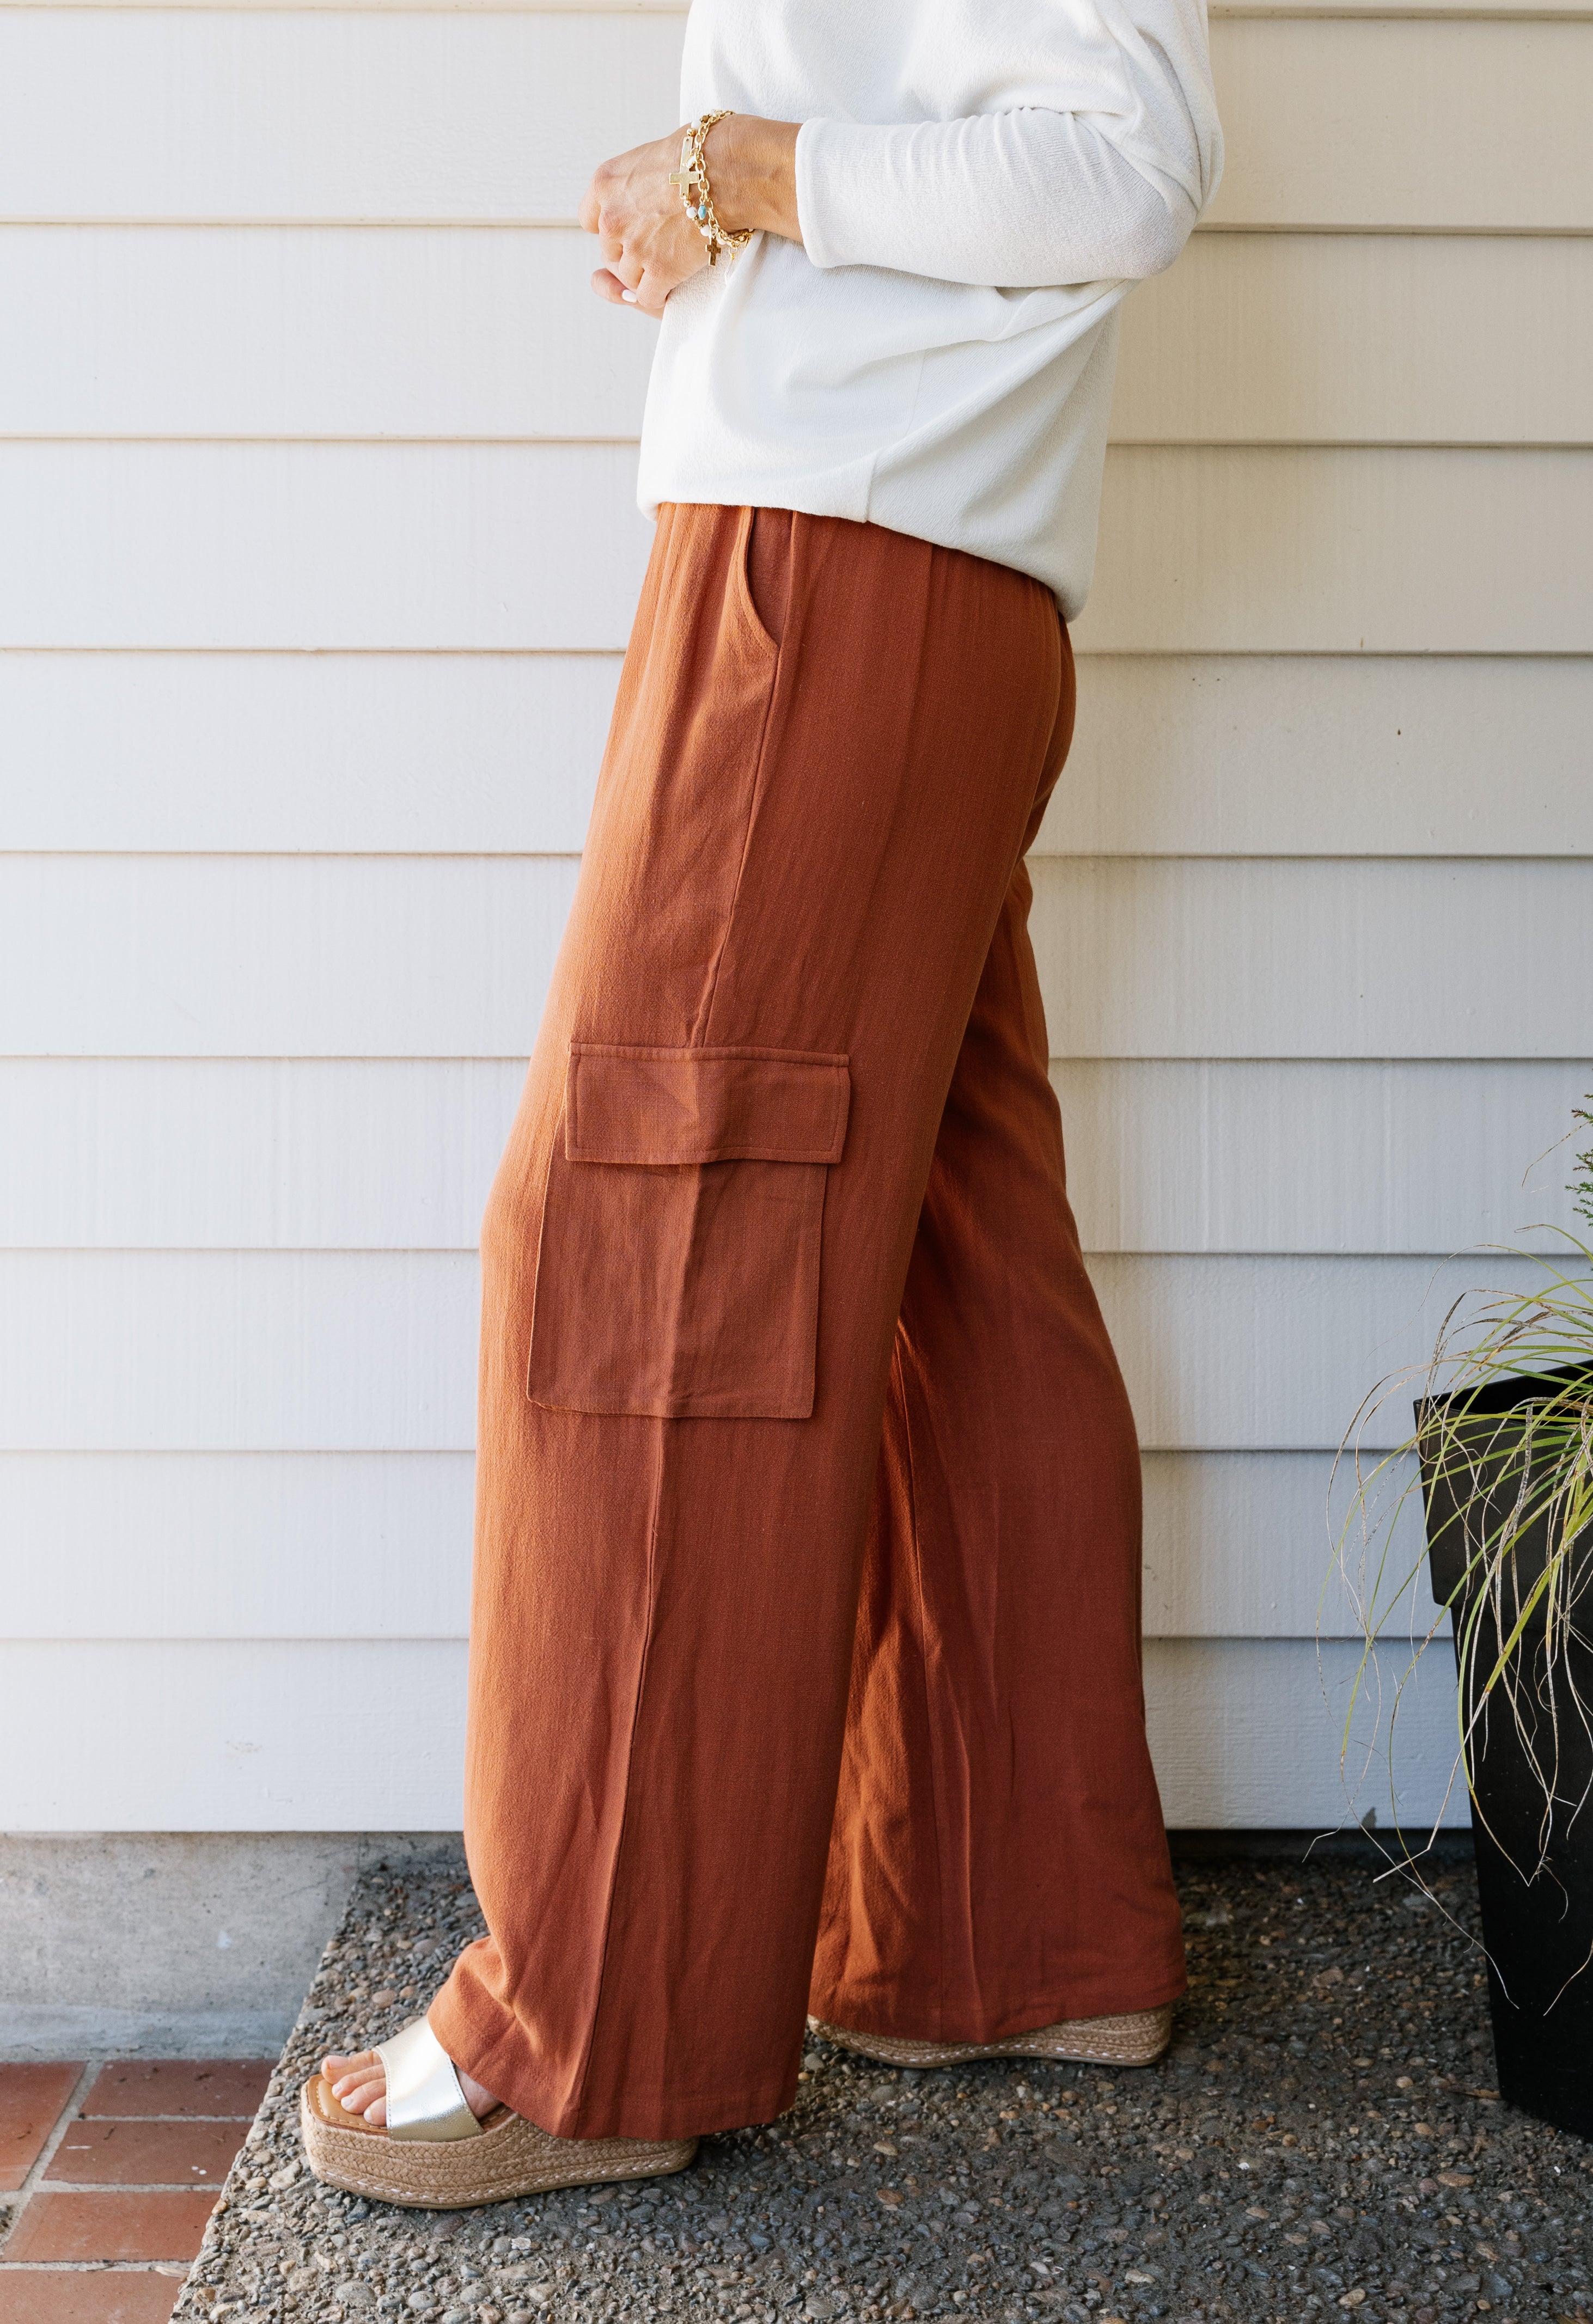 Aubrey Cargo Pants - BAKED CLAY - willows clothing Pants